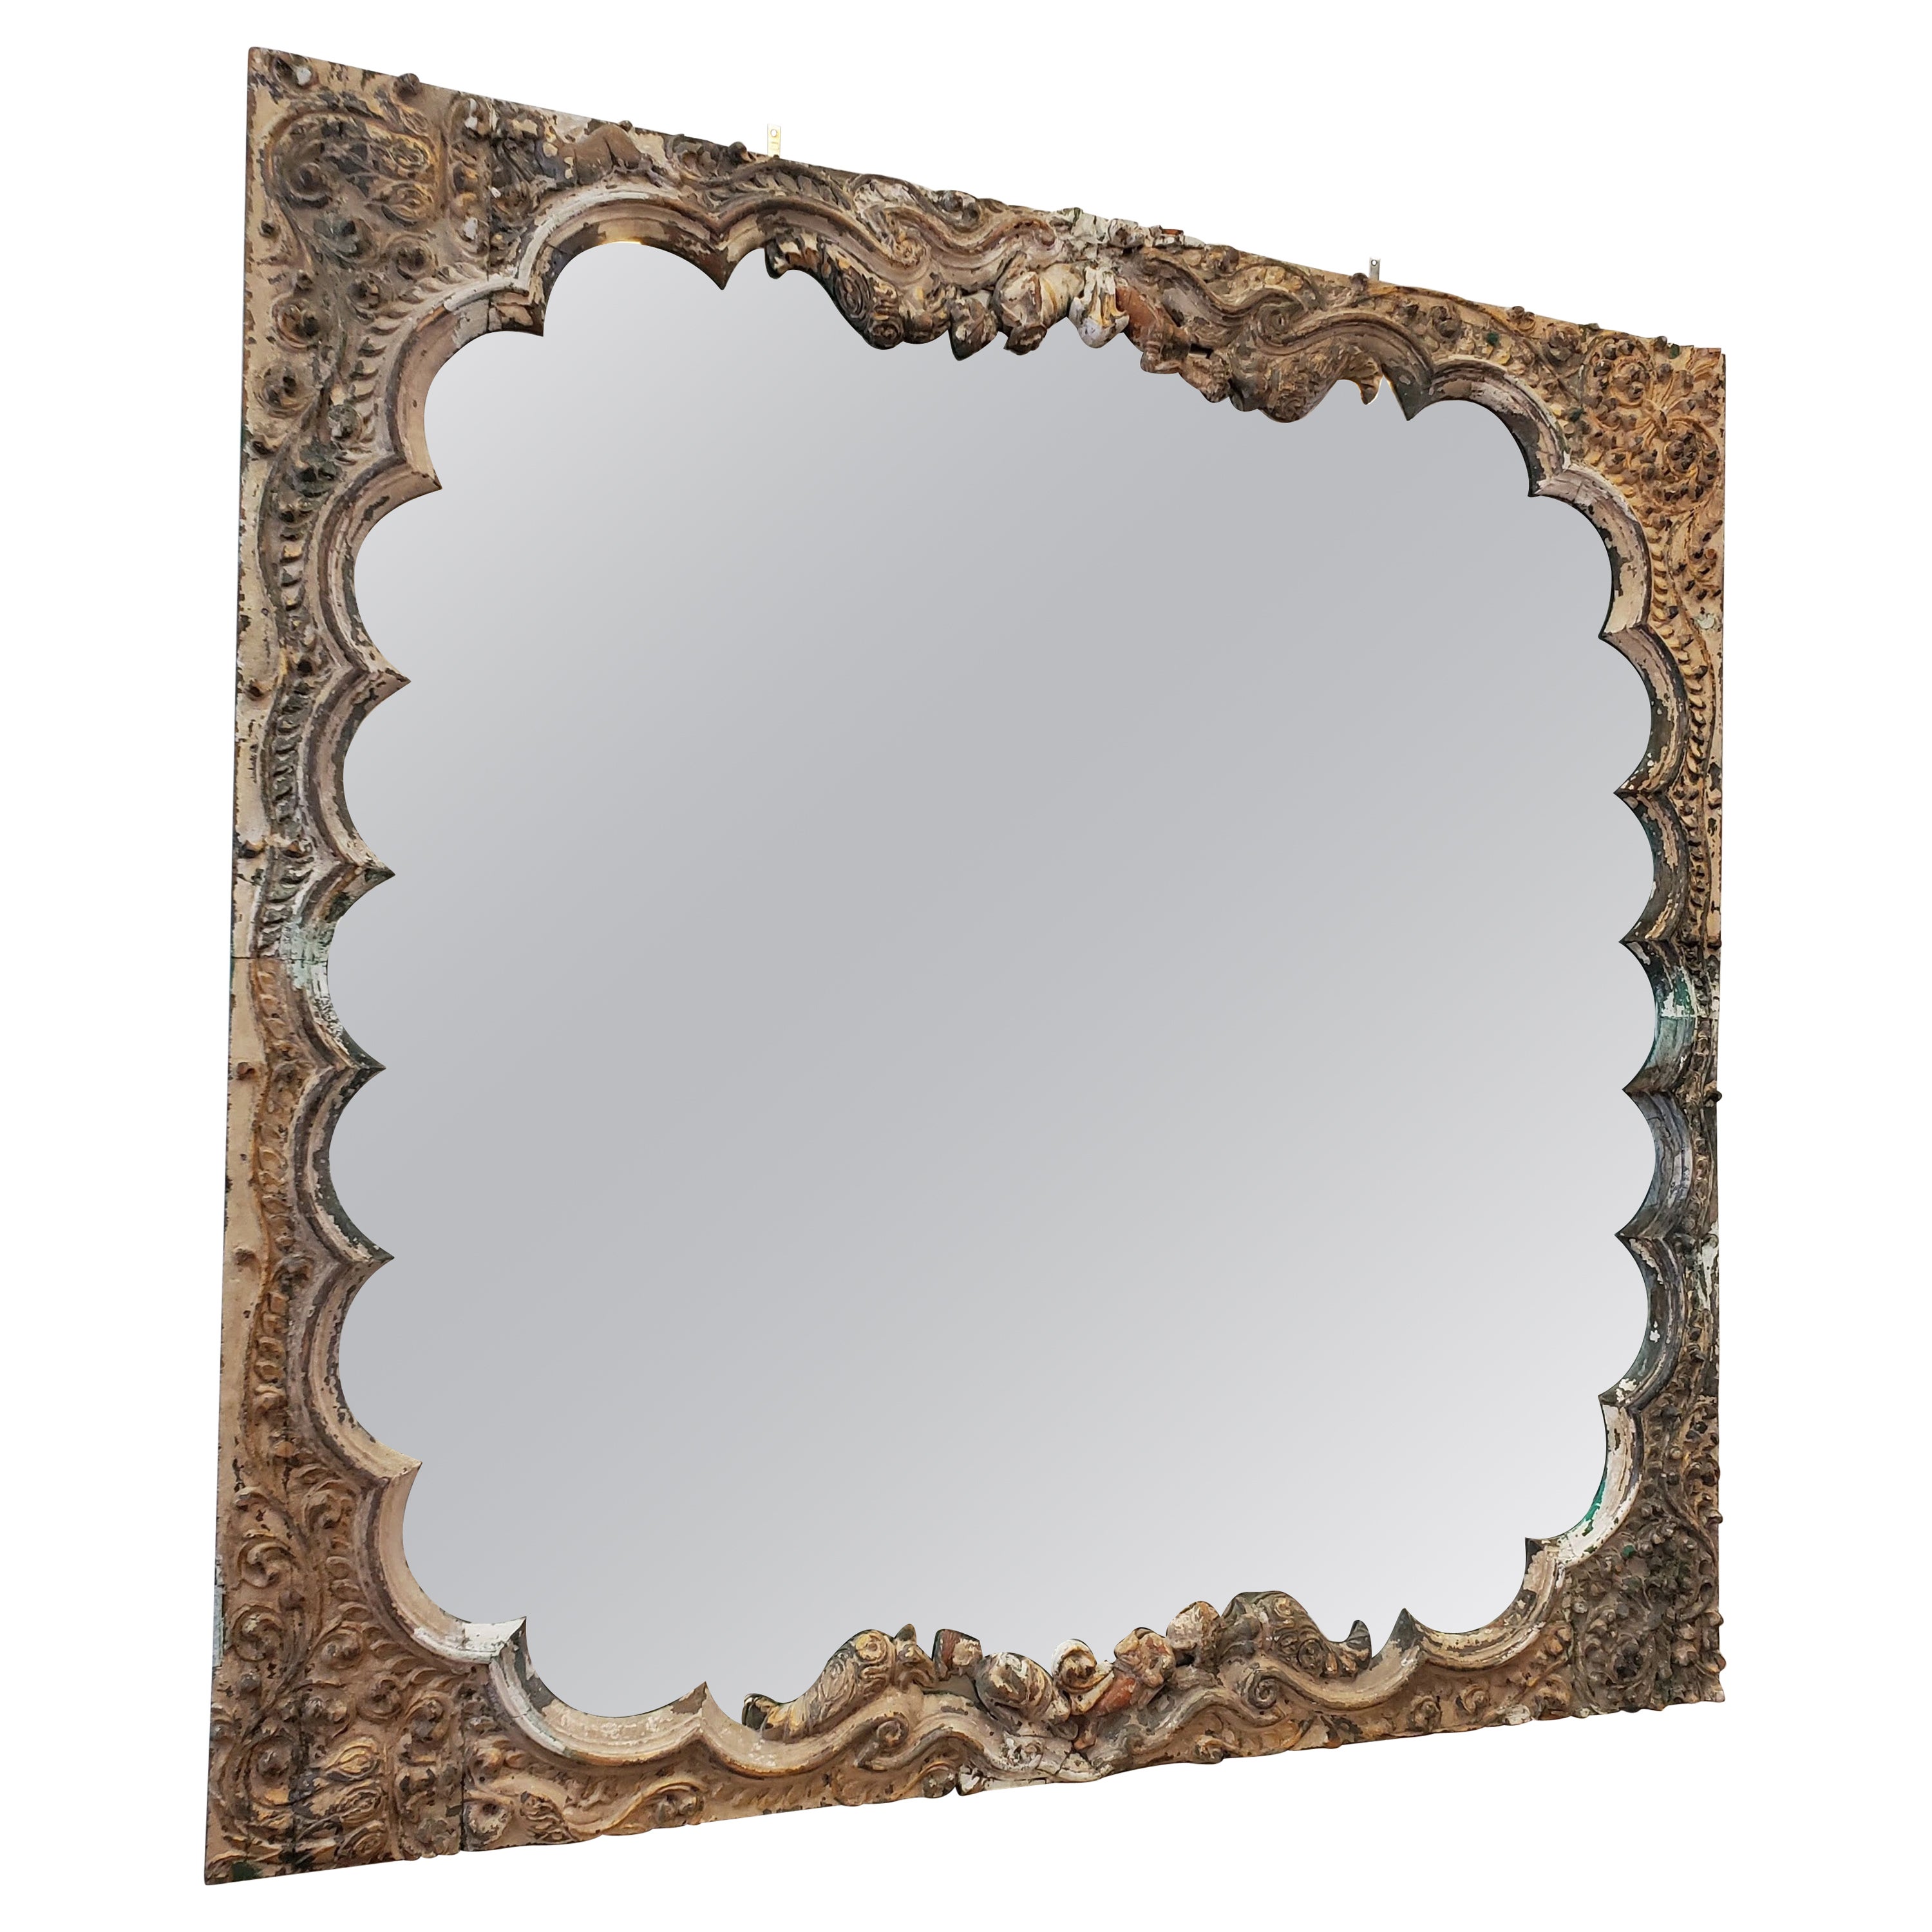 Extra Large Mid-19th Century Gothic Influenced Italian Carved “Fantasy” Mirror